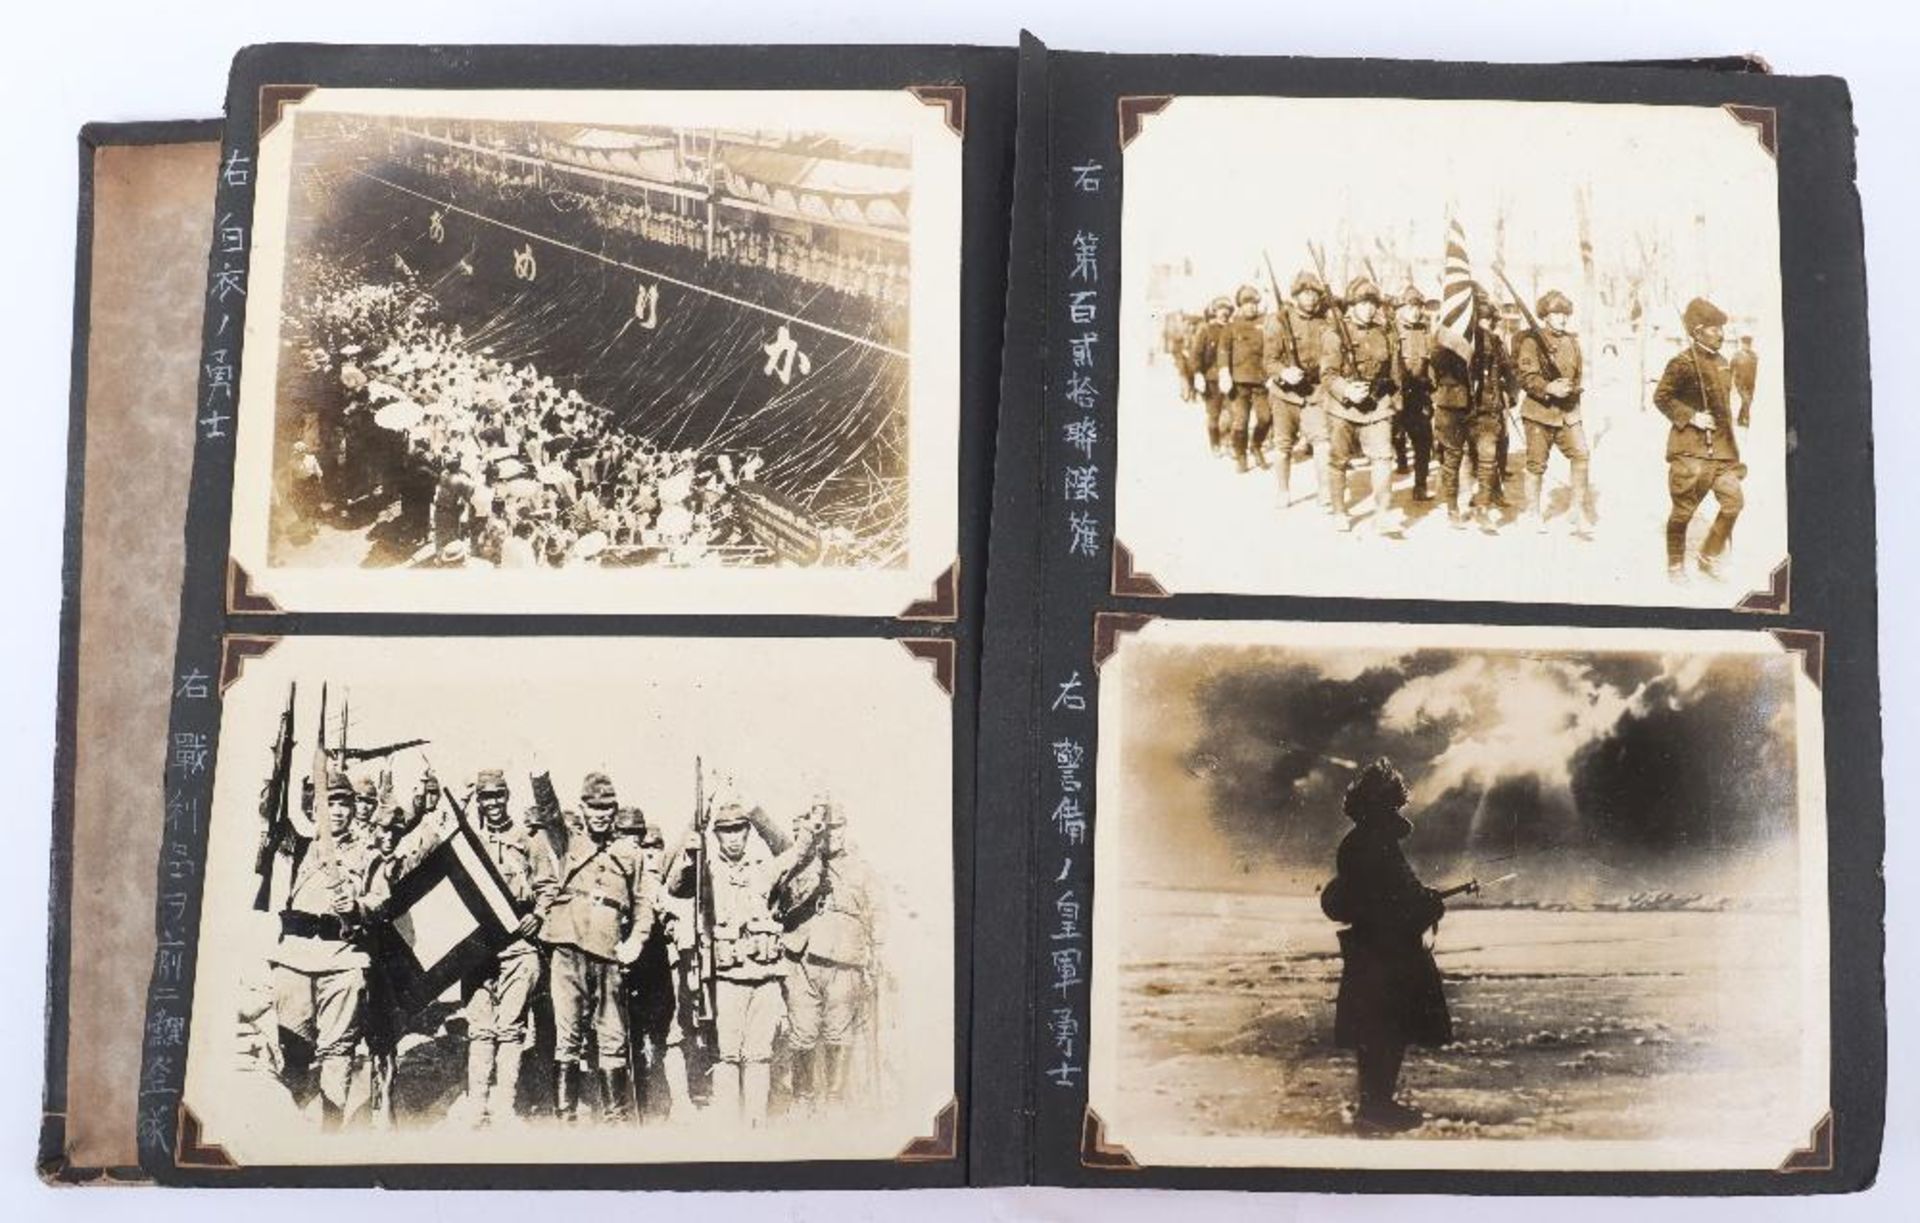 Two Japanese Photograph Albums, showing military action in China - Image 2 of 22